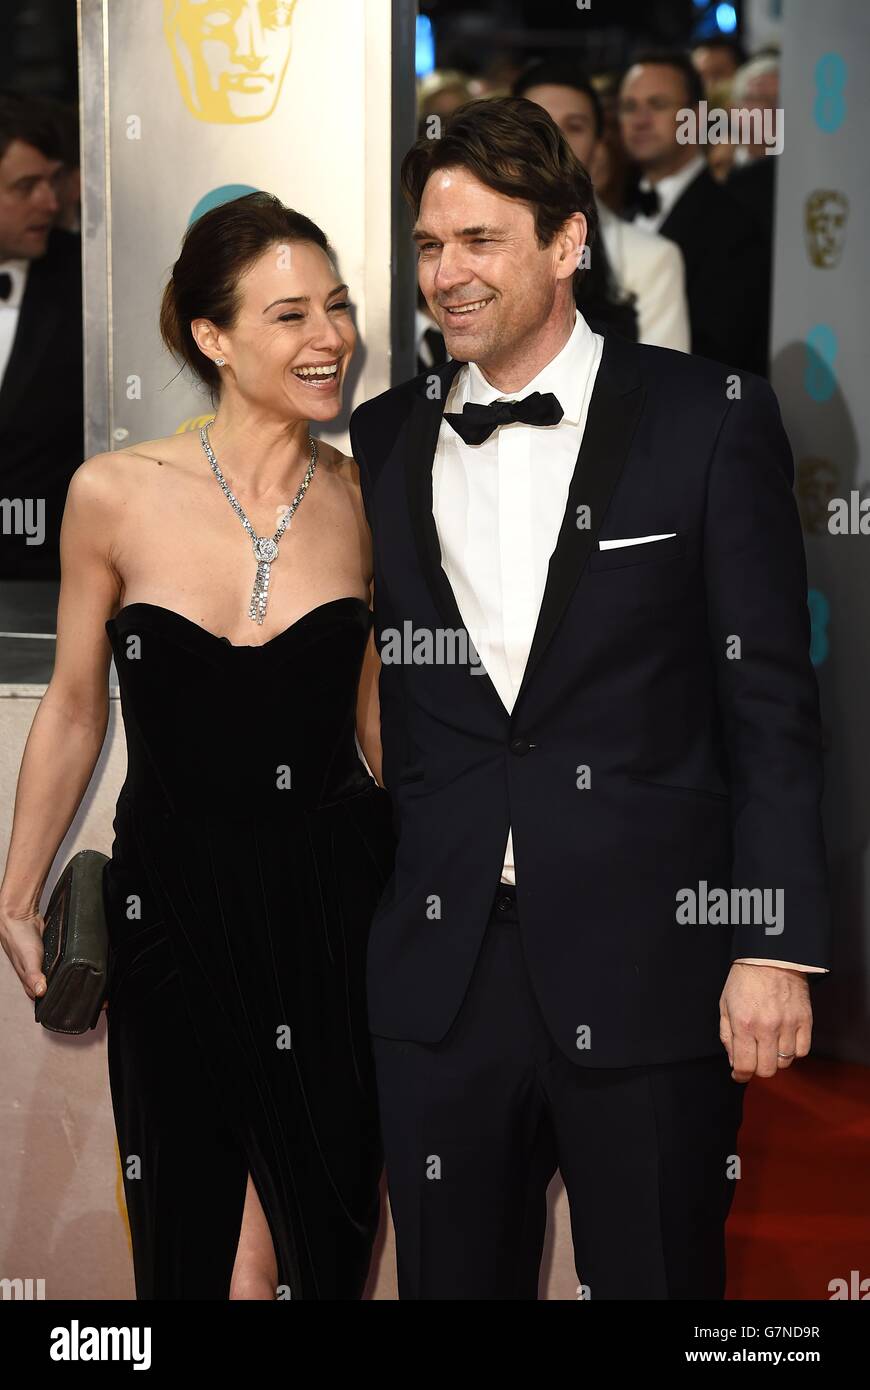 Claire Forlani and Dougray Scott arriving at The EE British Academy Film Awards 2015, at the Royal Opera House, Bow Street, London. Stock Photo